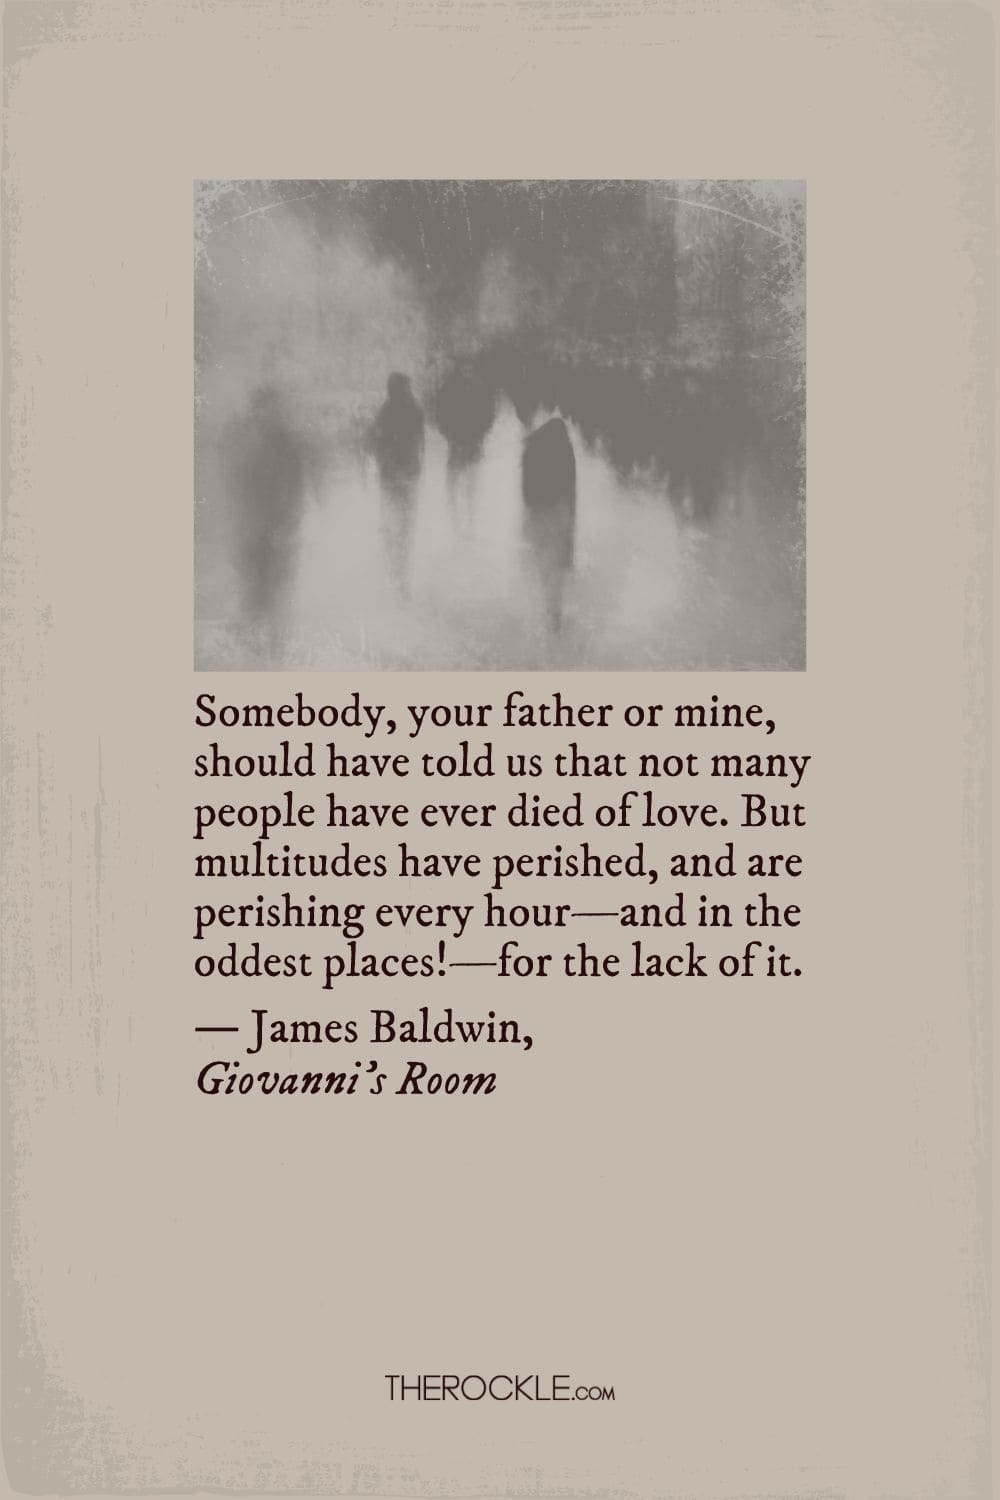 James Baldwin on the absence of love